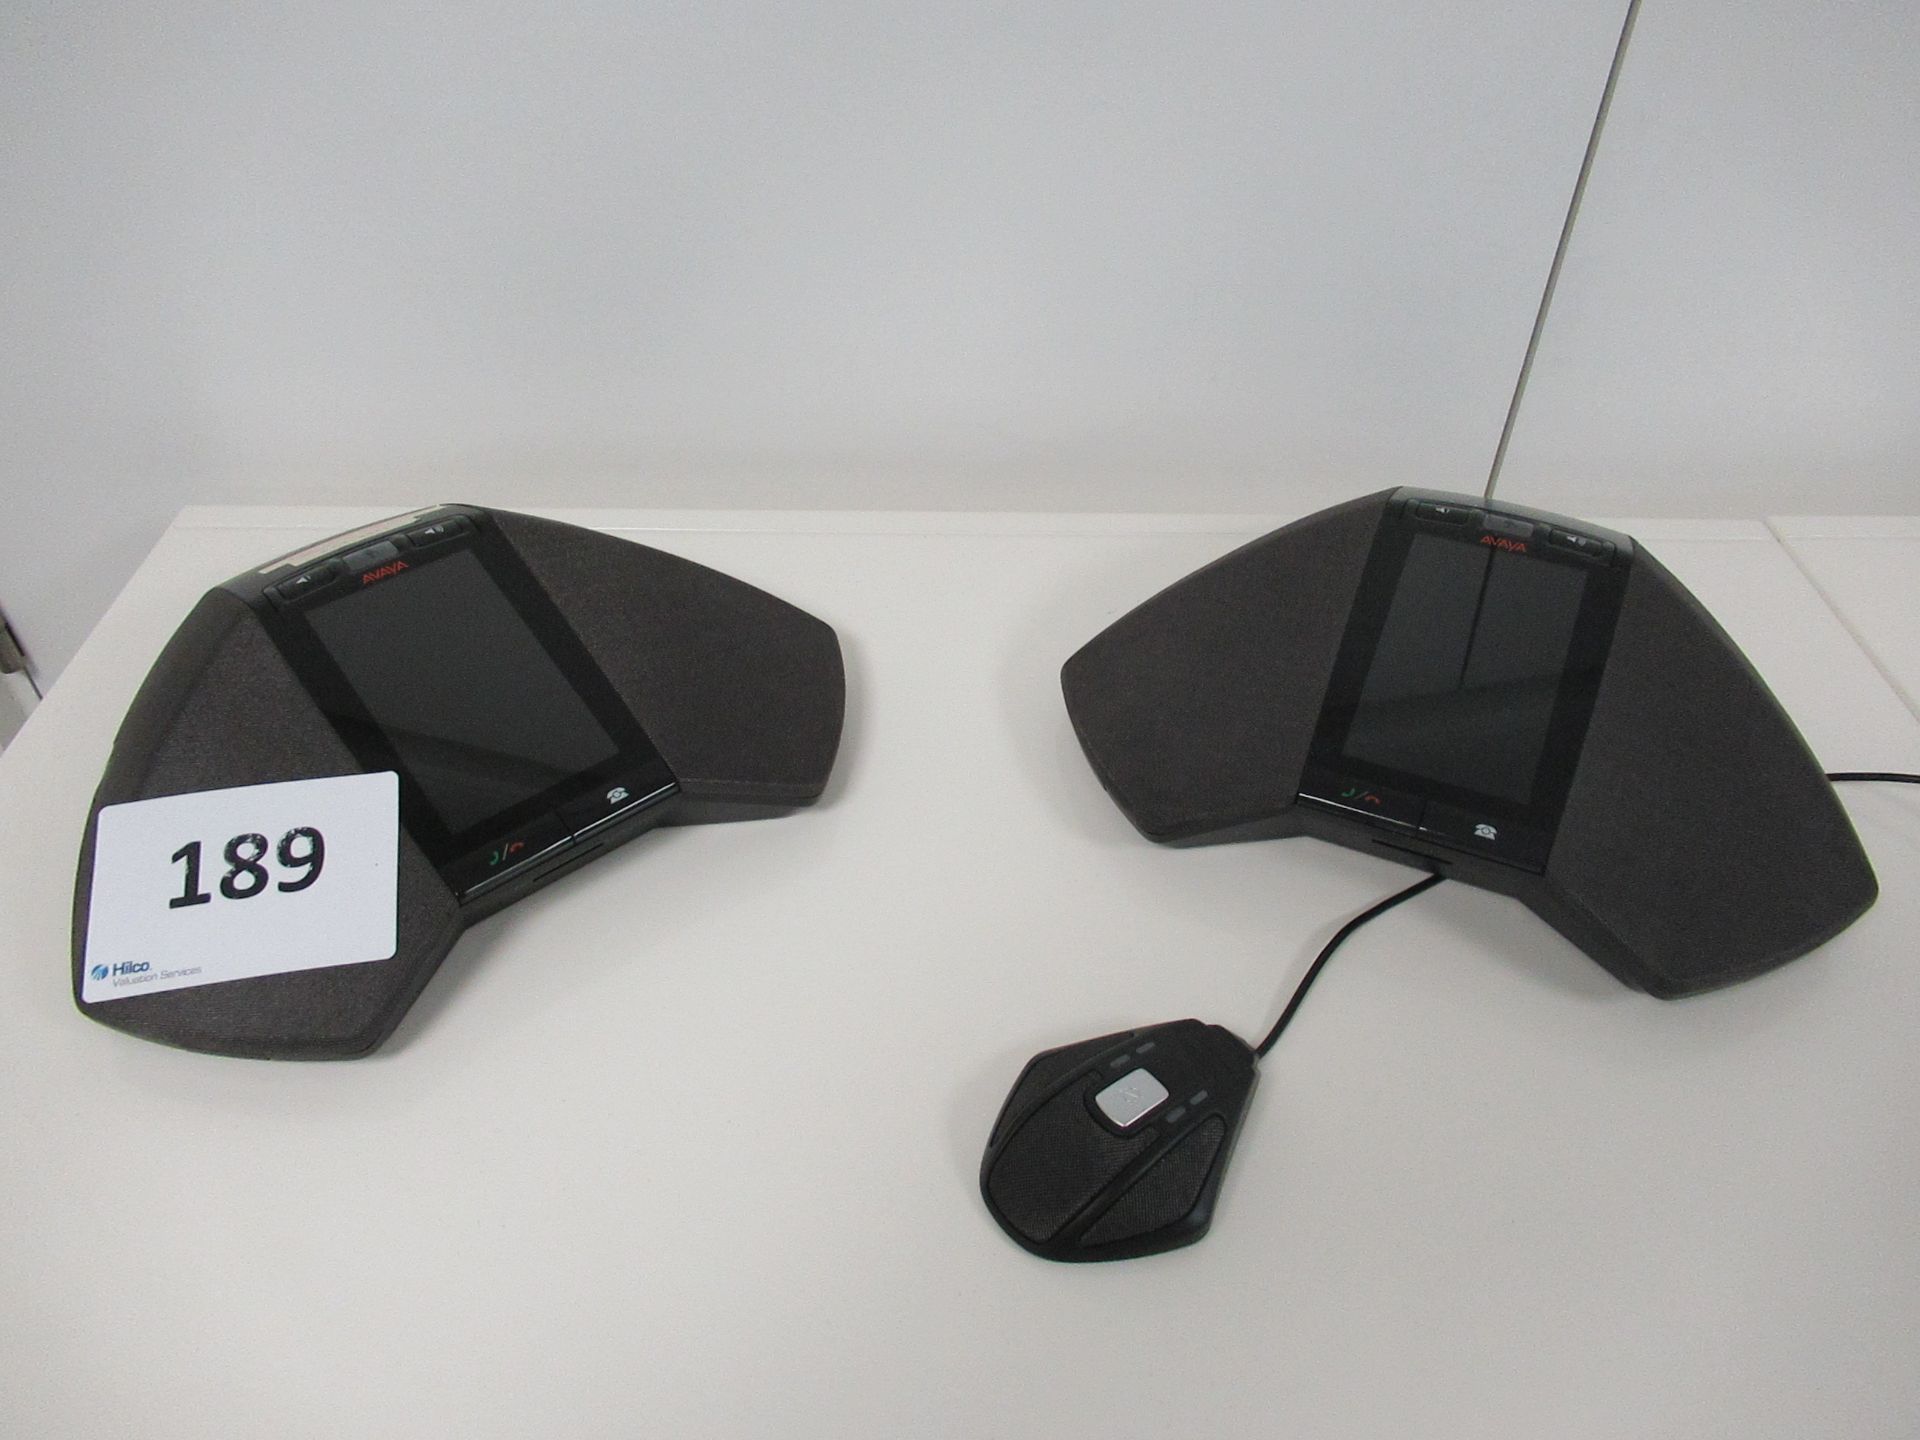 A Pair of Avaya B189 IP Conference Phones with a Avaya B100 Expansion Microphone